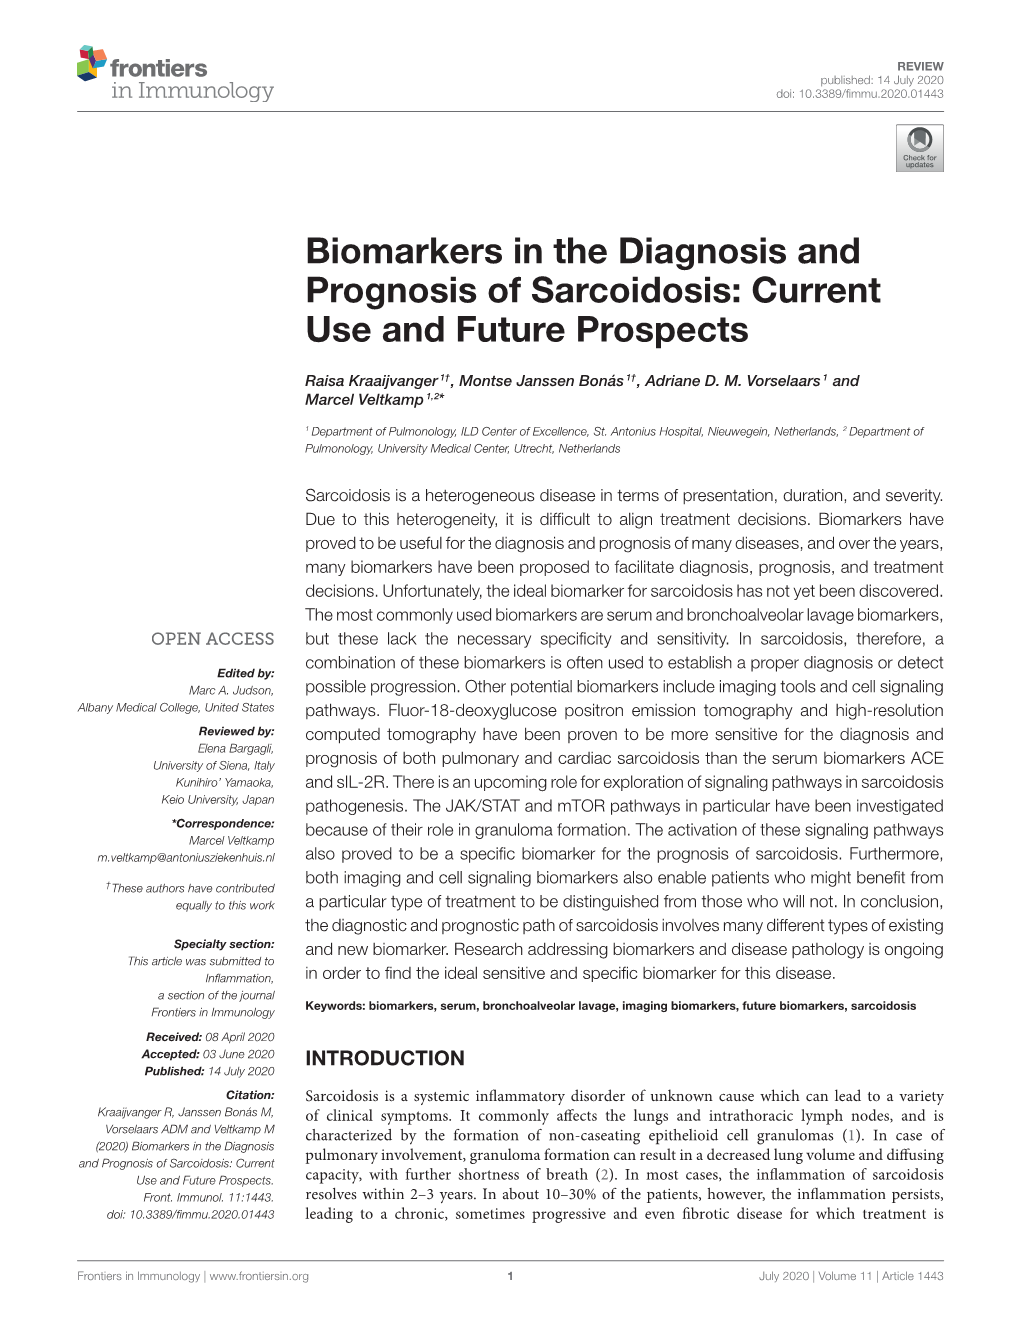 Biomarkers in the Diagnosis and Prognosis of Sarcoidosis: Current Use and Future Prospects